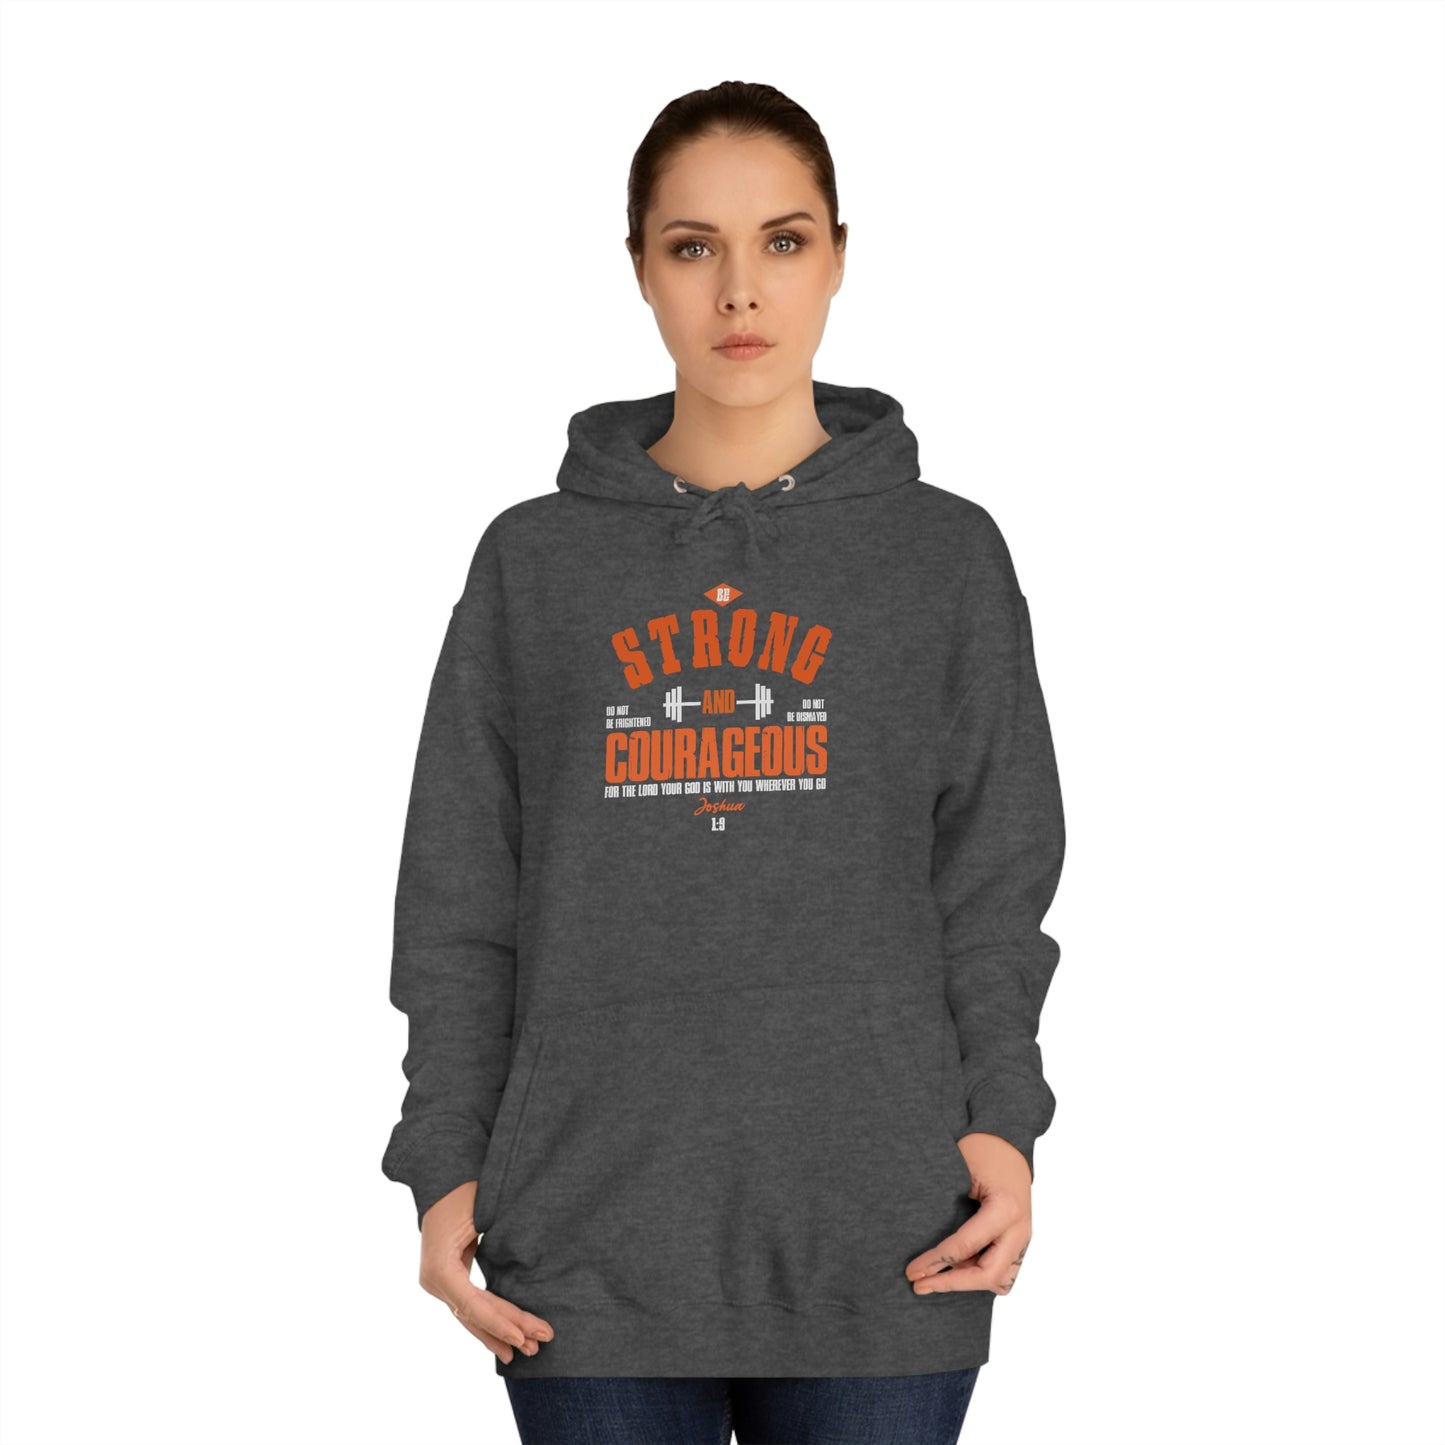 Be Strong and Courageous - Unisex College Hoodie